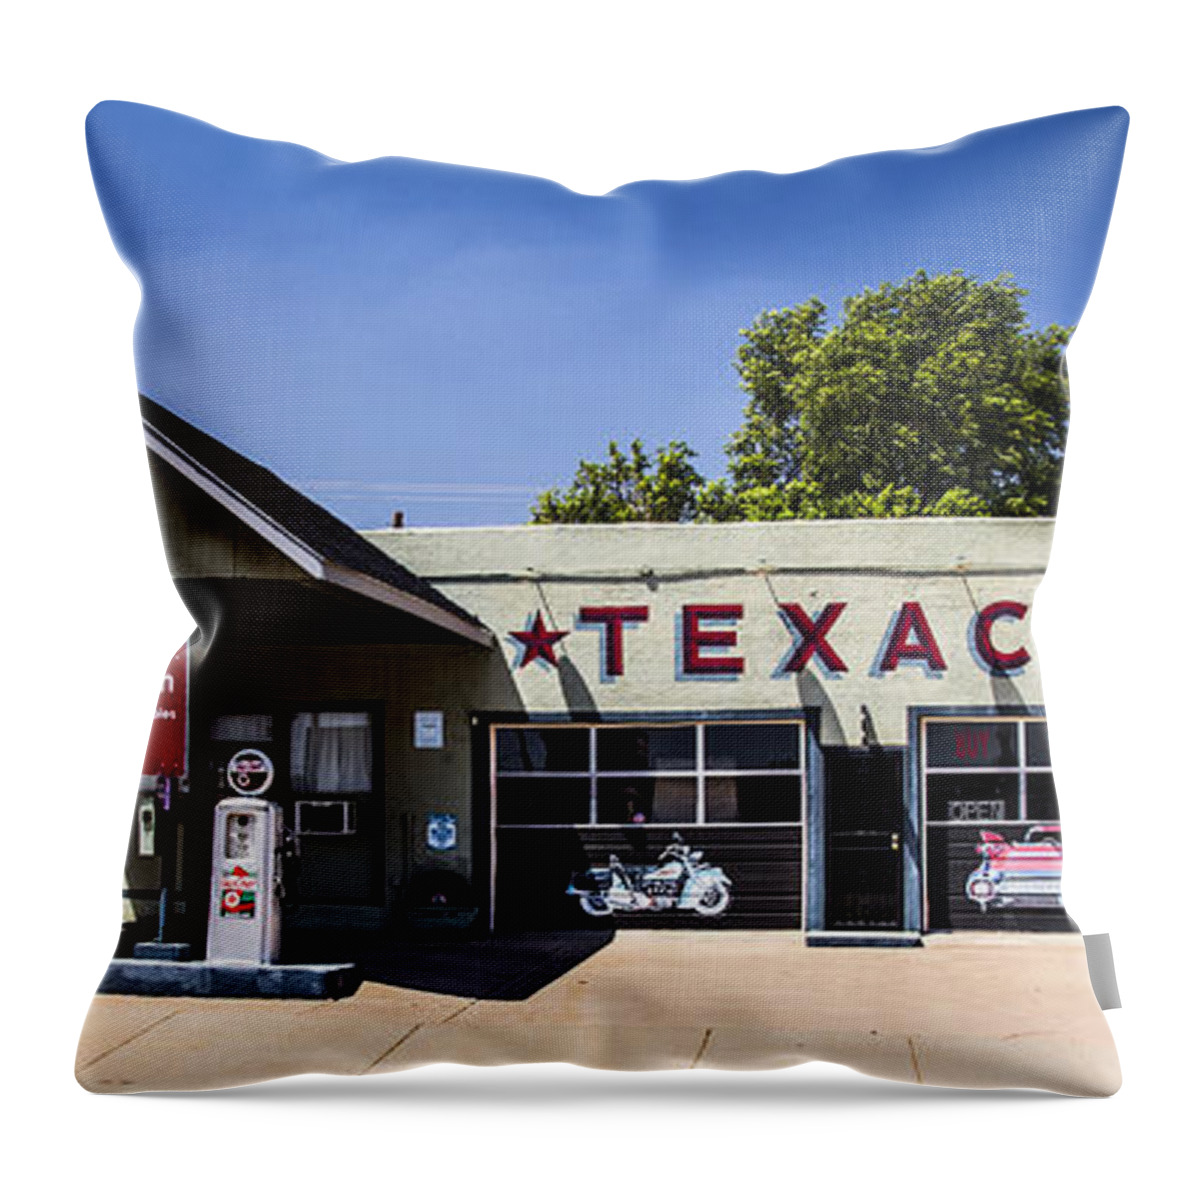 Route 66 Throw Pillow featuring the photograph Texaco NM by Angus HOOPER III